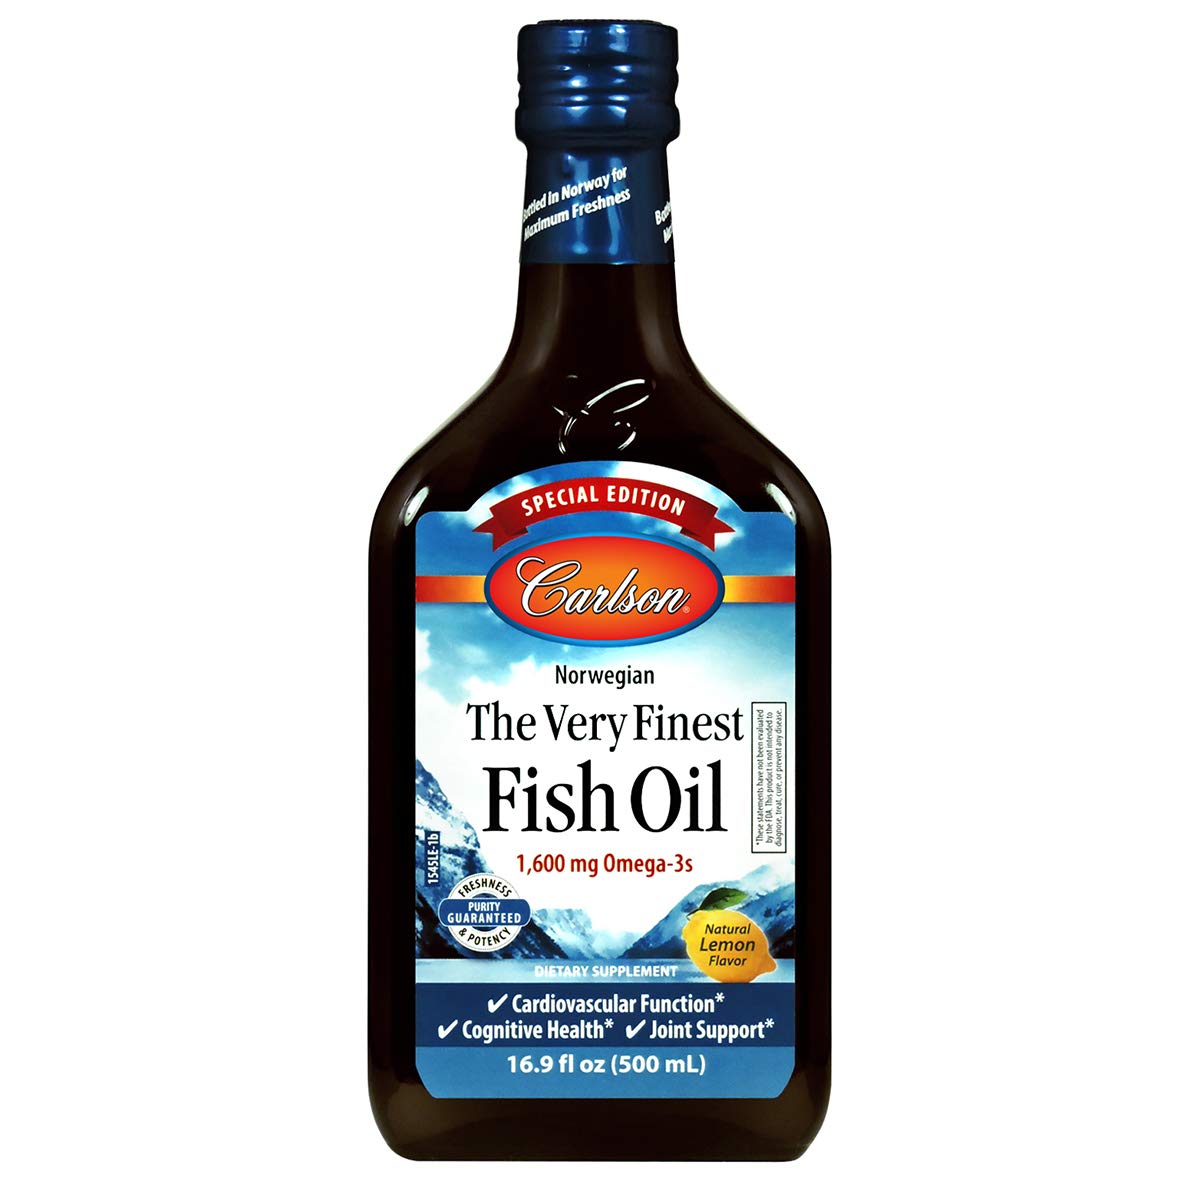 Carlson - The Very Finest Fish Oil, Special Edition, 1600 mg Omega-3s, Liquid Fish Oil Supplement, Norwegian Fish Oil, Wild-Caught, Sustainably Sou...